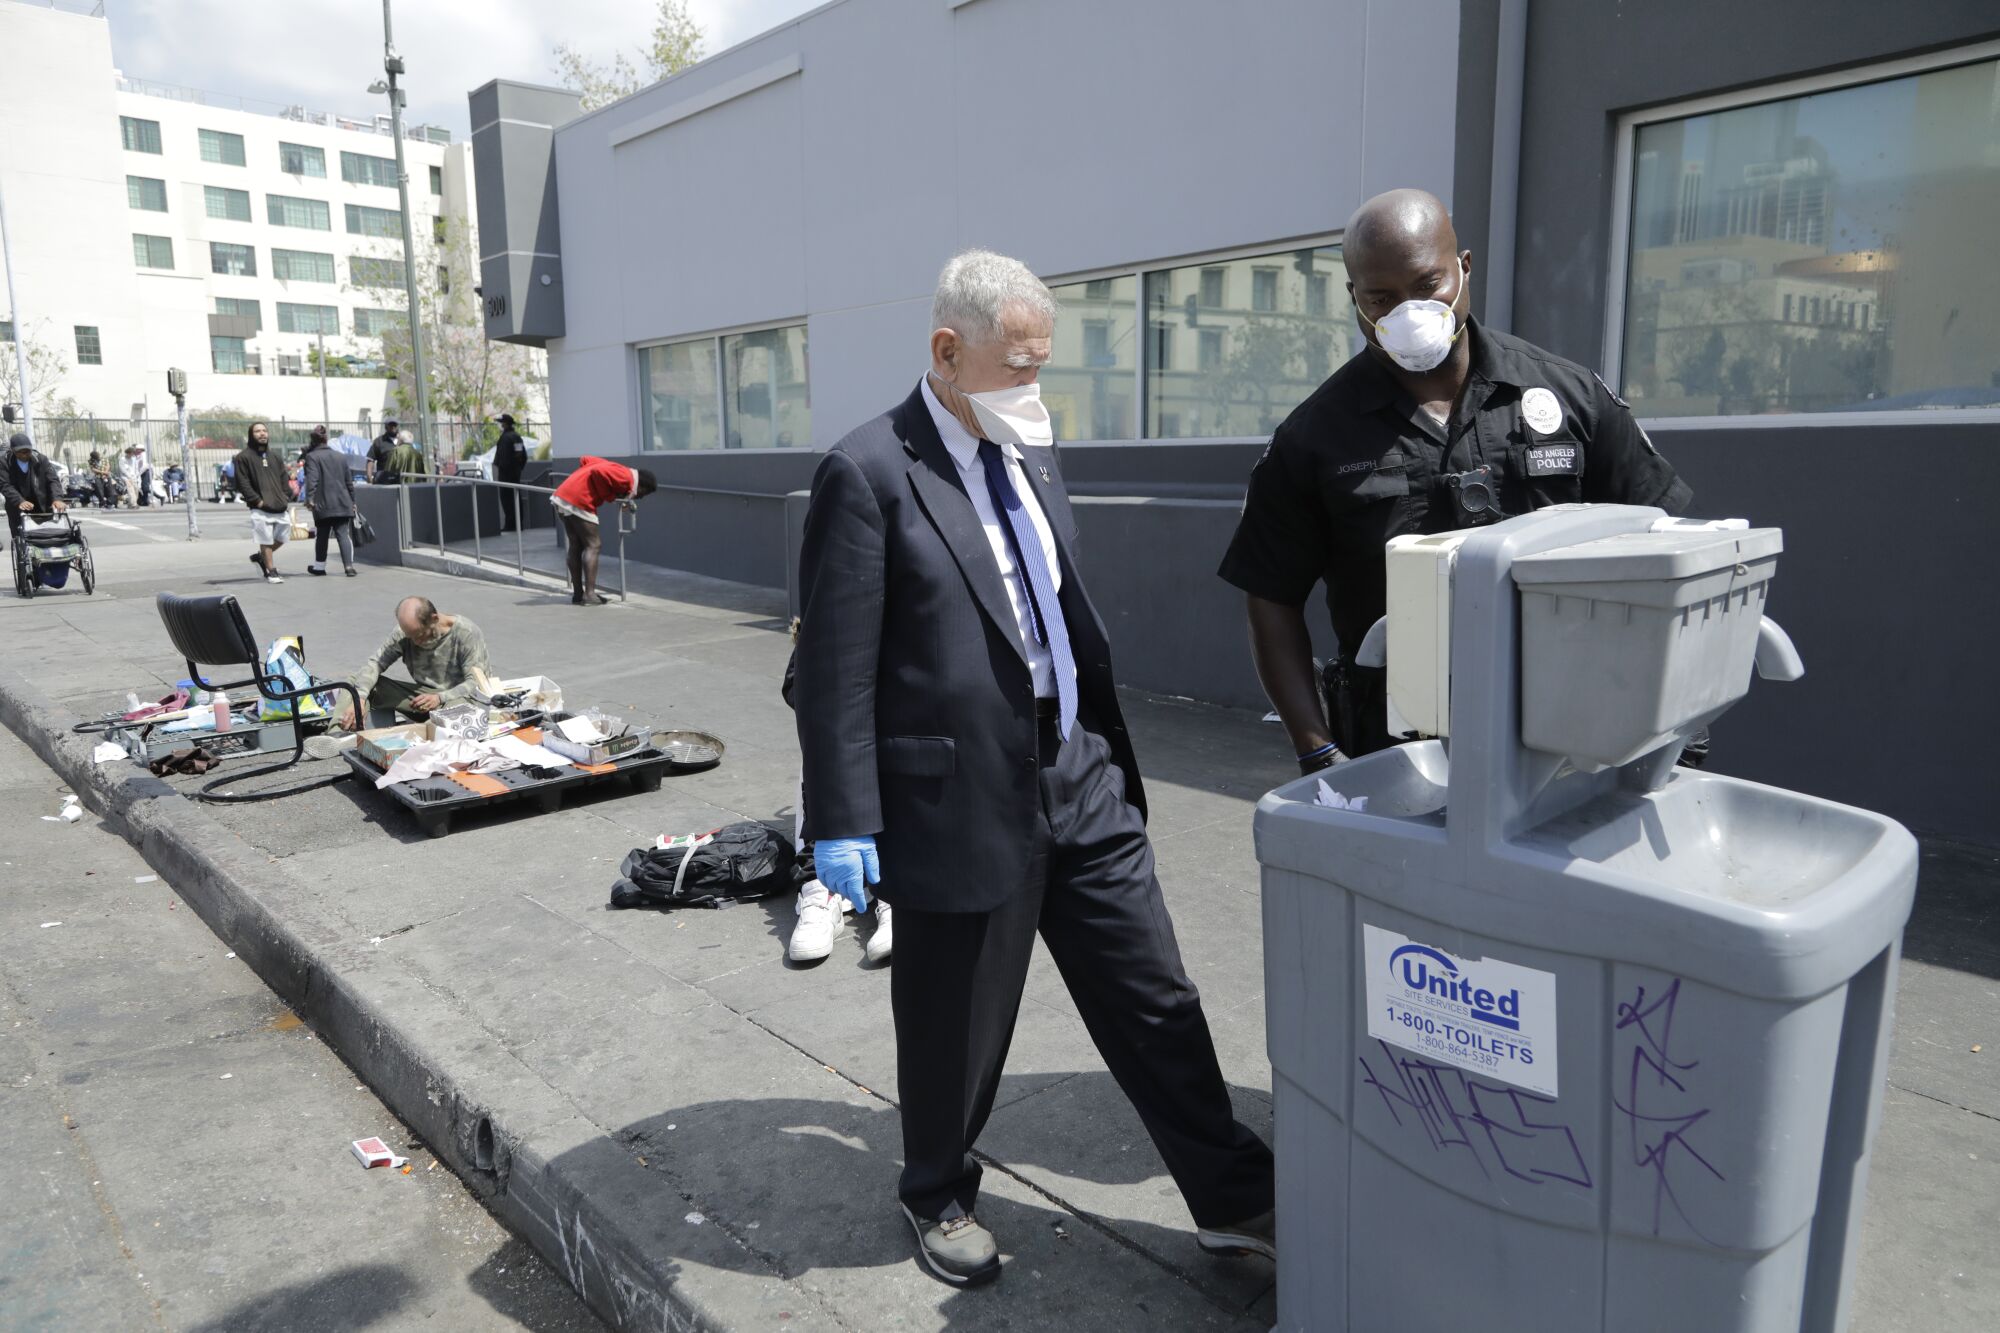 U.S. District Court Judge David O. Carter and Los Angeles Police Officer Deon Joseph check an empty water dispenser while touring skid row on April 3 in downtown Los Angeles. Joseph said he noticed it was empty about 1 1/2 weeks ago.